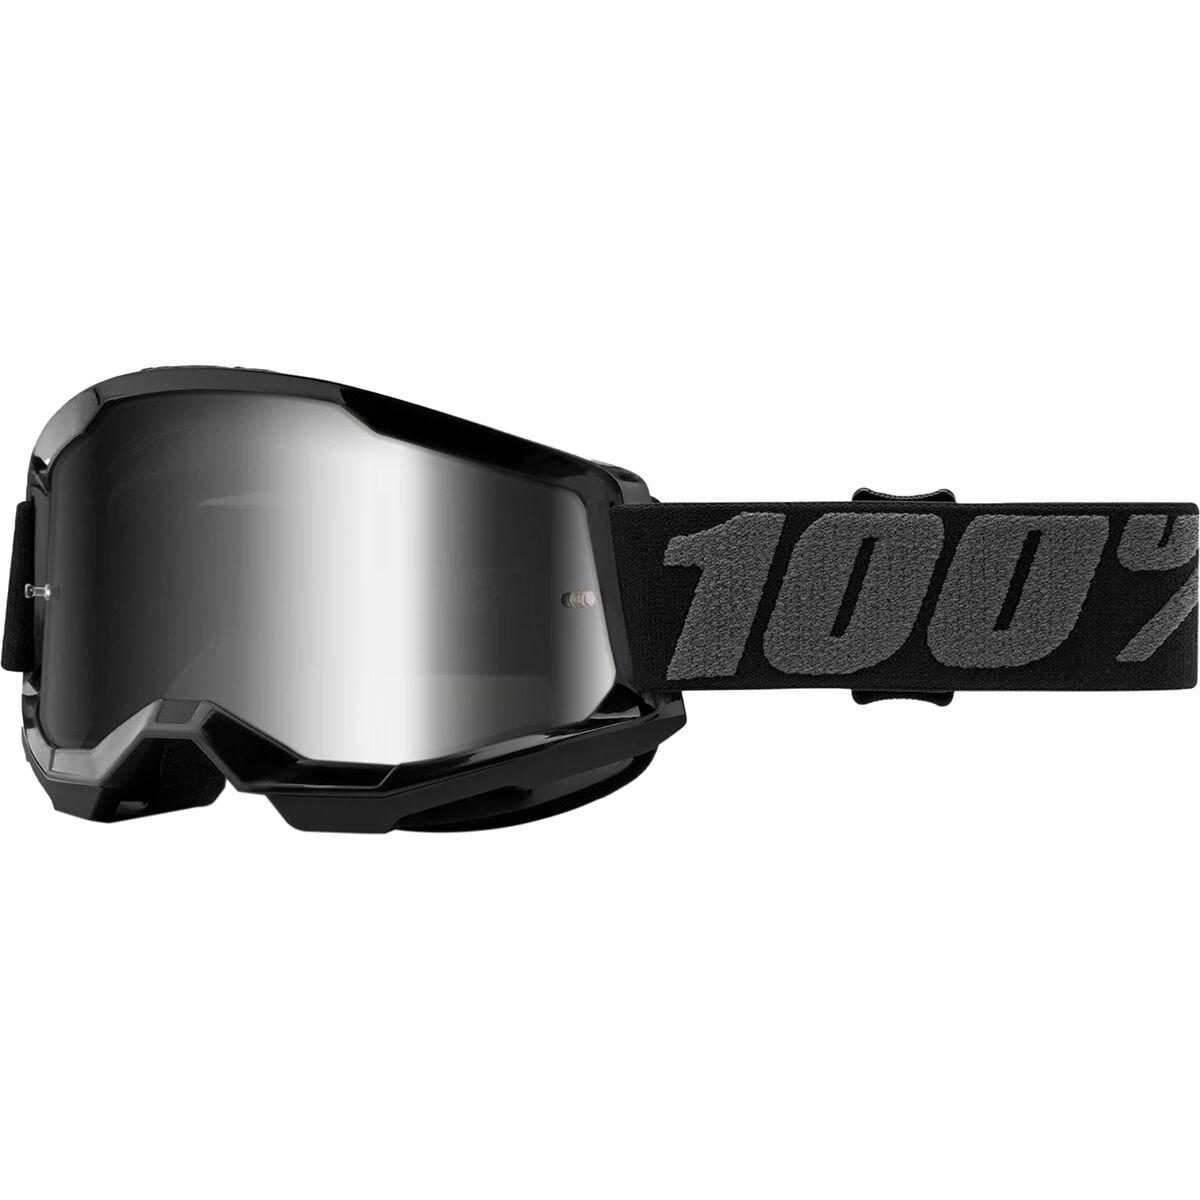 100% Strata 2 Mirrored Lens Goggles Black/Mirror Silver Lens, One Size